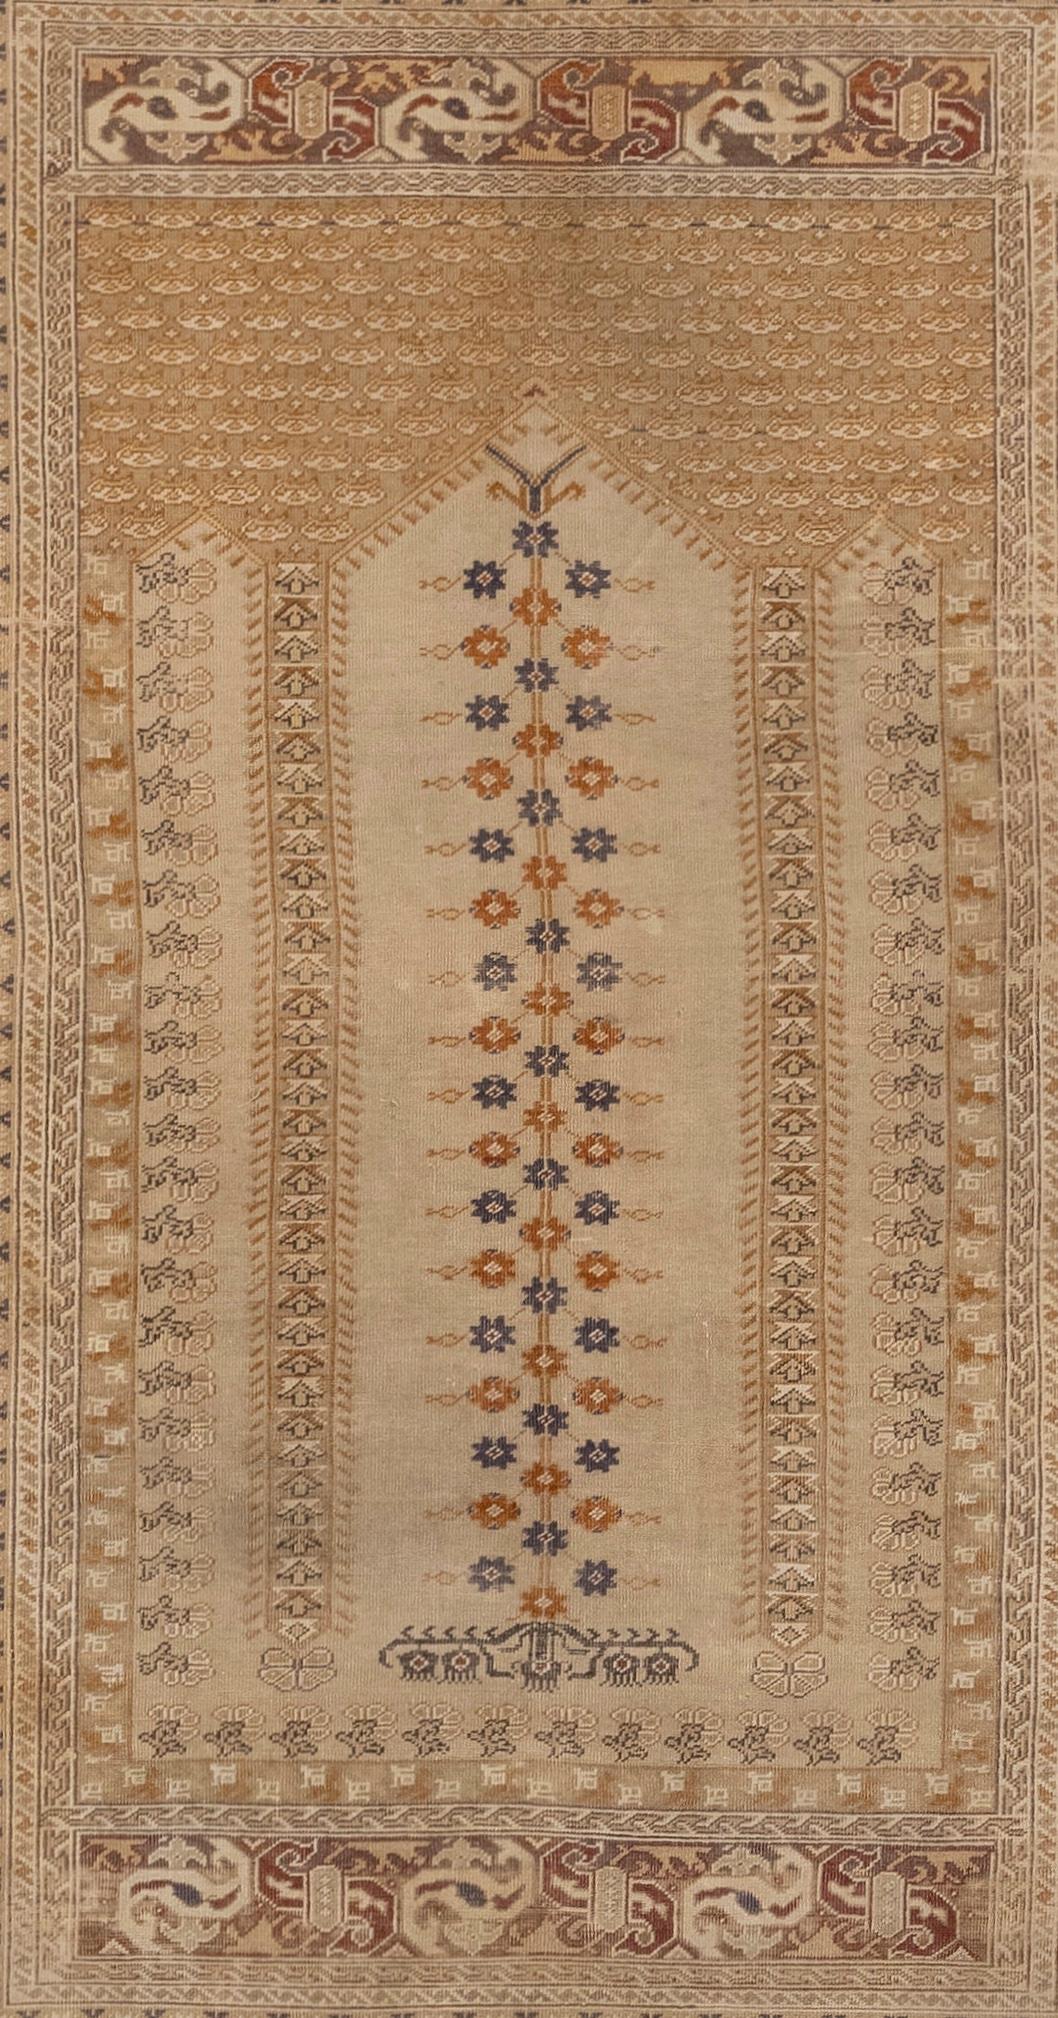 Antique Kaiseri rugs are a type of hand-woven Turkish rug that originated in the city of Kayseri, located in central Turkey. These rugs were made in the 19th and early 20th centuries and are highly prized by collectors and rug enthusiasts for their